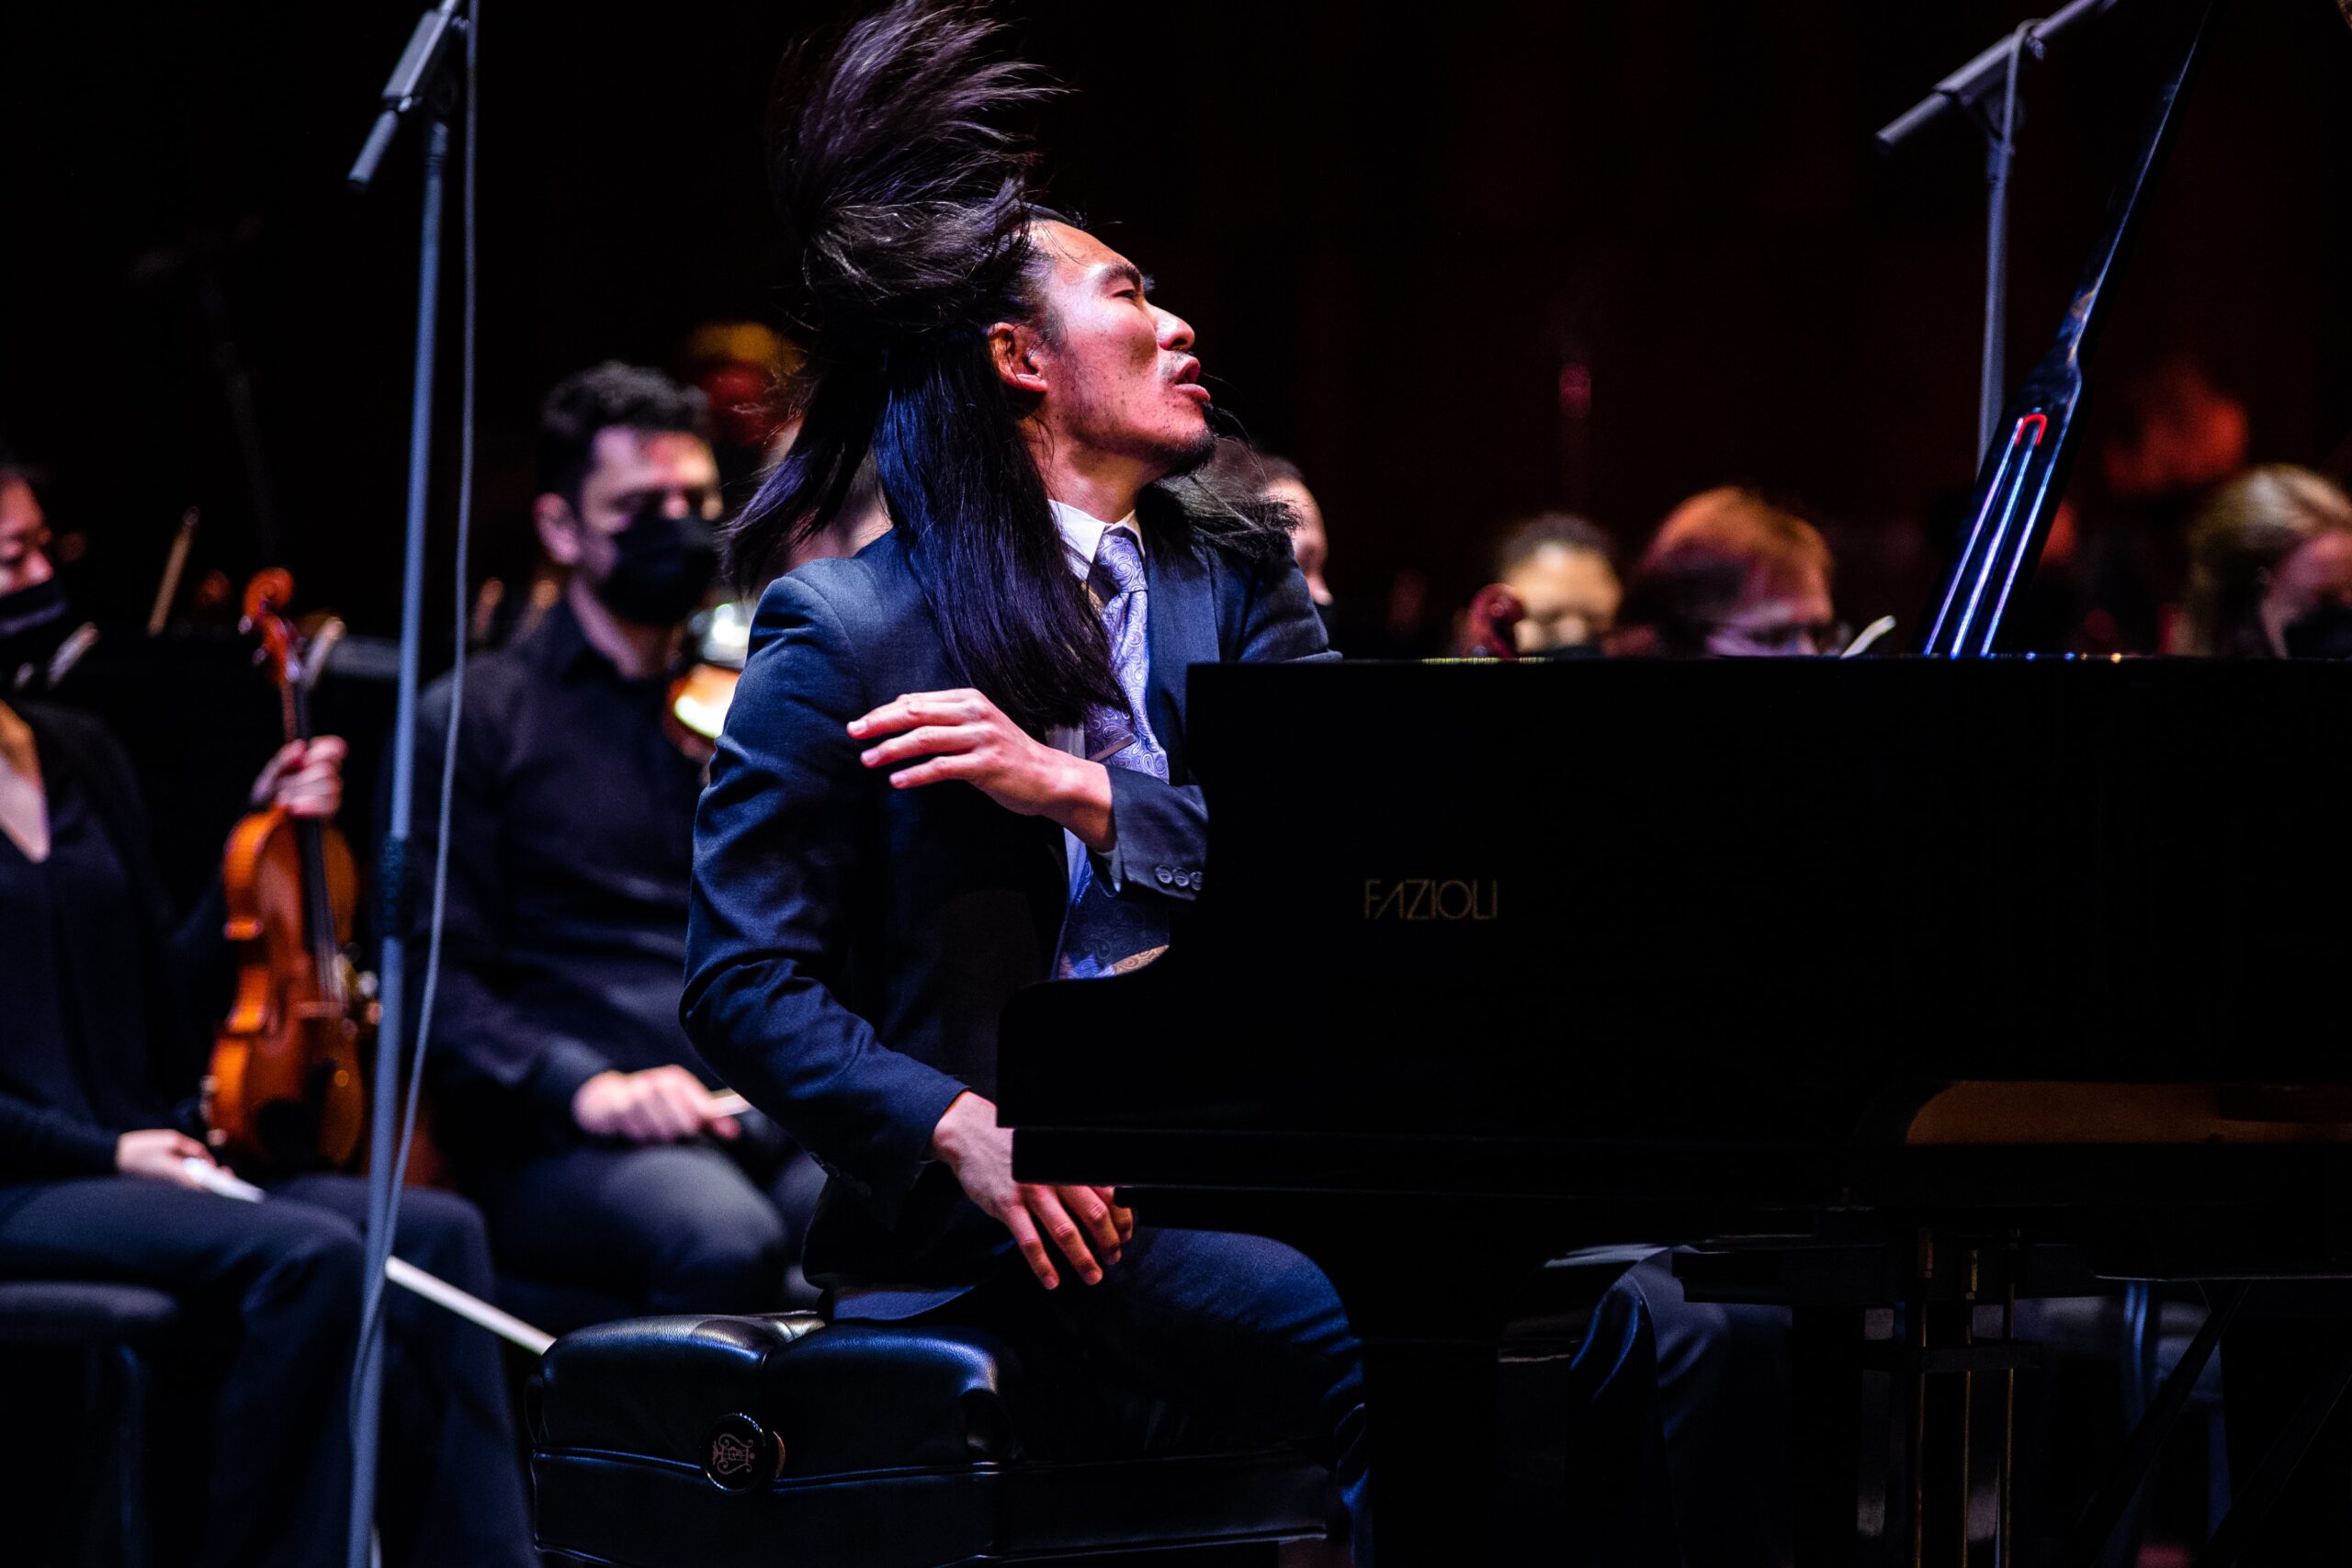 Sebastian Chang throws back his hair in a dramatic gesture while playing a virtuostic passage on a Fazioli Grand Piano onstage in front of the Britt Festival Orchestra premiering his Piano Concerto "The Empress". He is dressed in a dark grey suit and is wearing a purple tie with a tie clip. His hair is styled half up, half down, and is flying in the air.